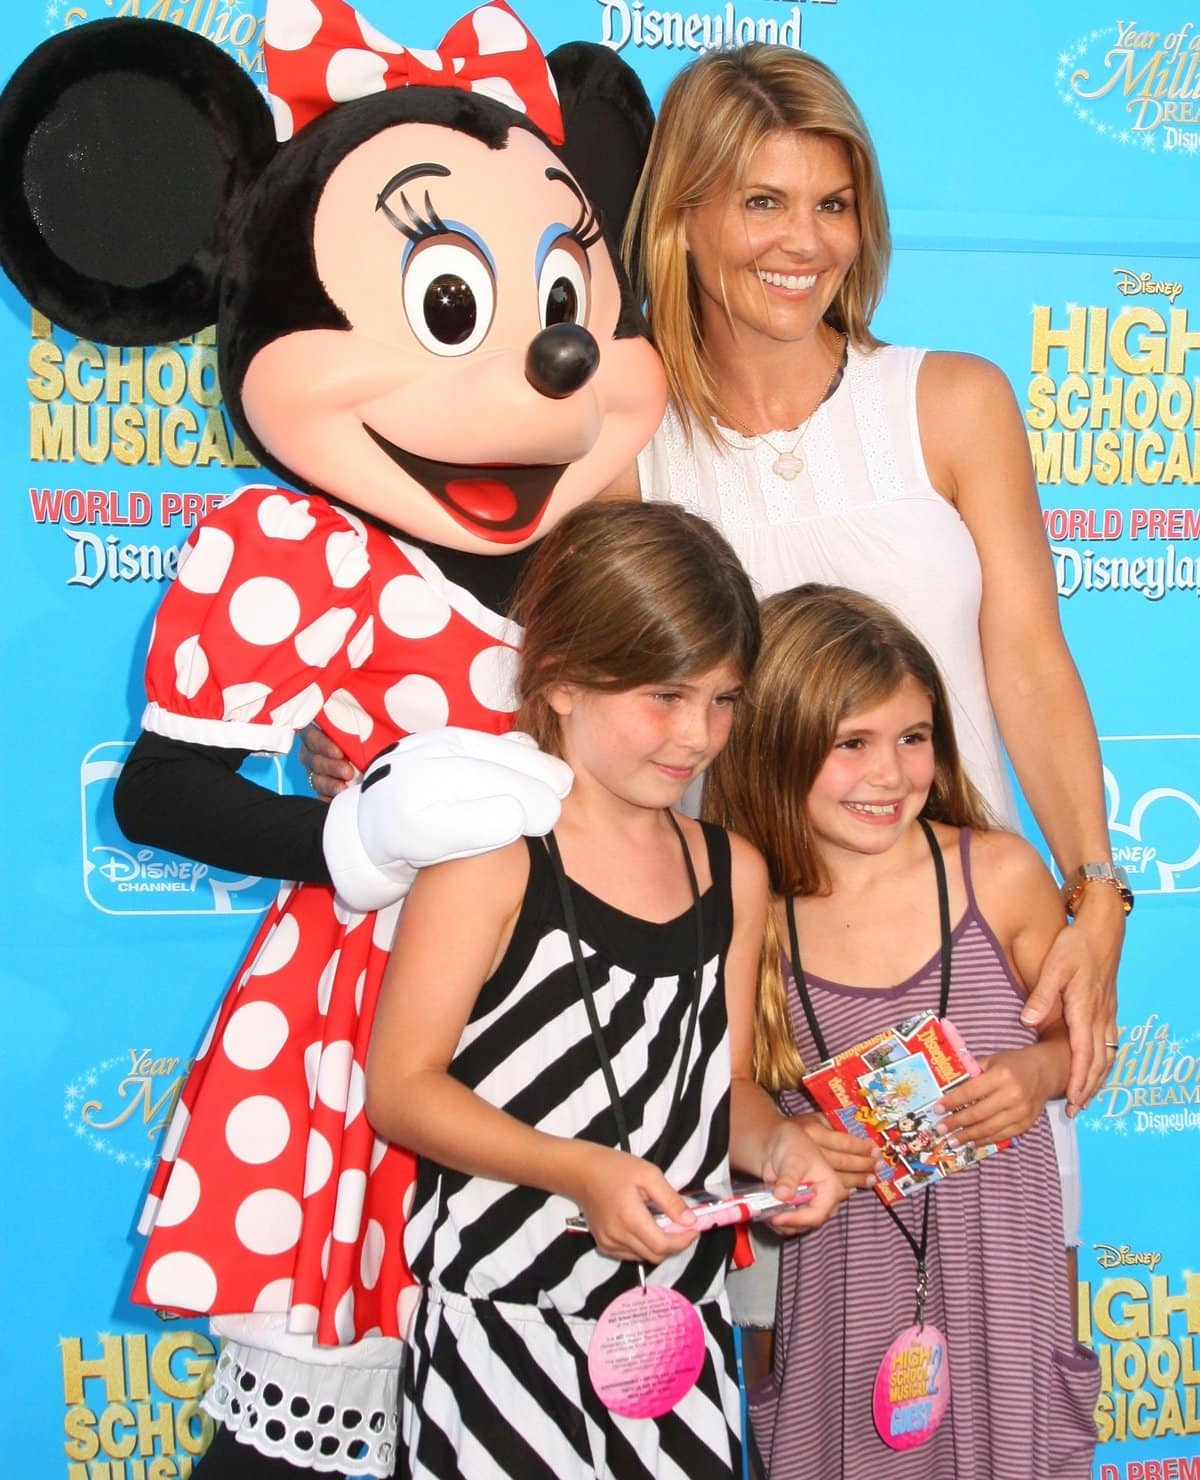 Actress Lori Loughlin and her daughters Olivia Jade Giannulli and Isabella Rose Giannulli